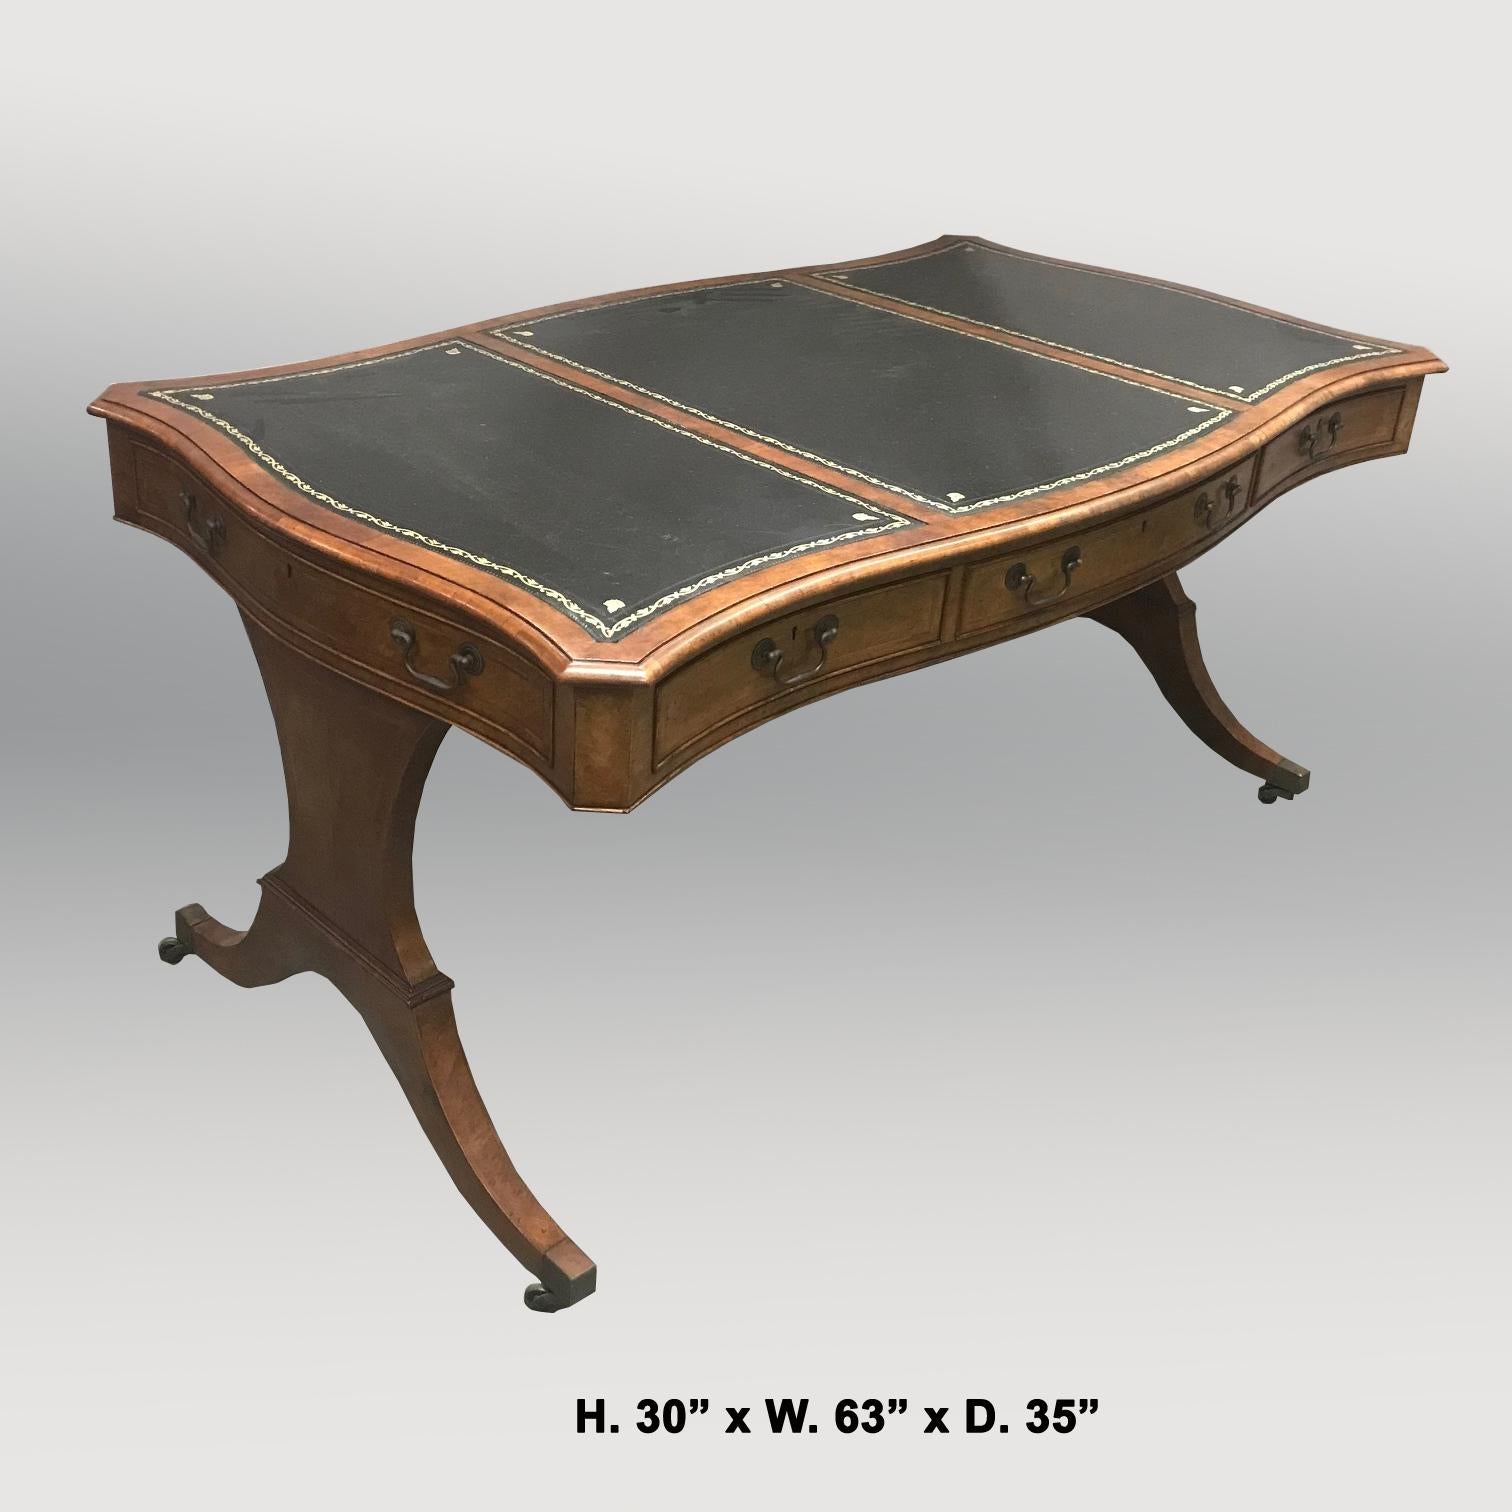 Uniquely shaped English George III style mahogany serpentine desk.
The moulded top of the desk is inset with three tooled leather writing surfaces, over a conforming serpentine frieze fitted with three drawers and seven sham drawers raised on two